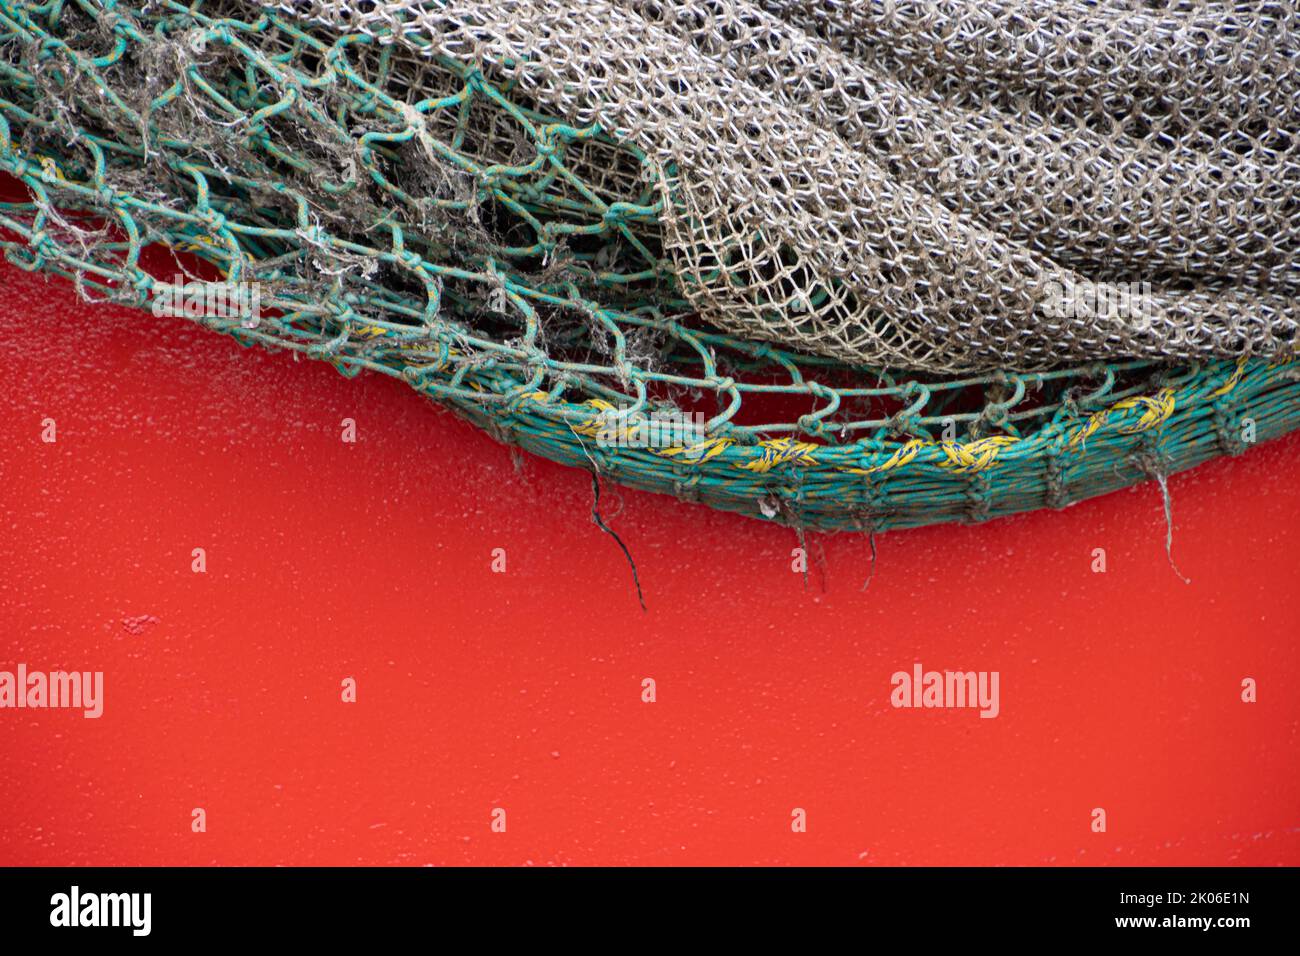 Fishing net hanging over red background Stock Photo